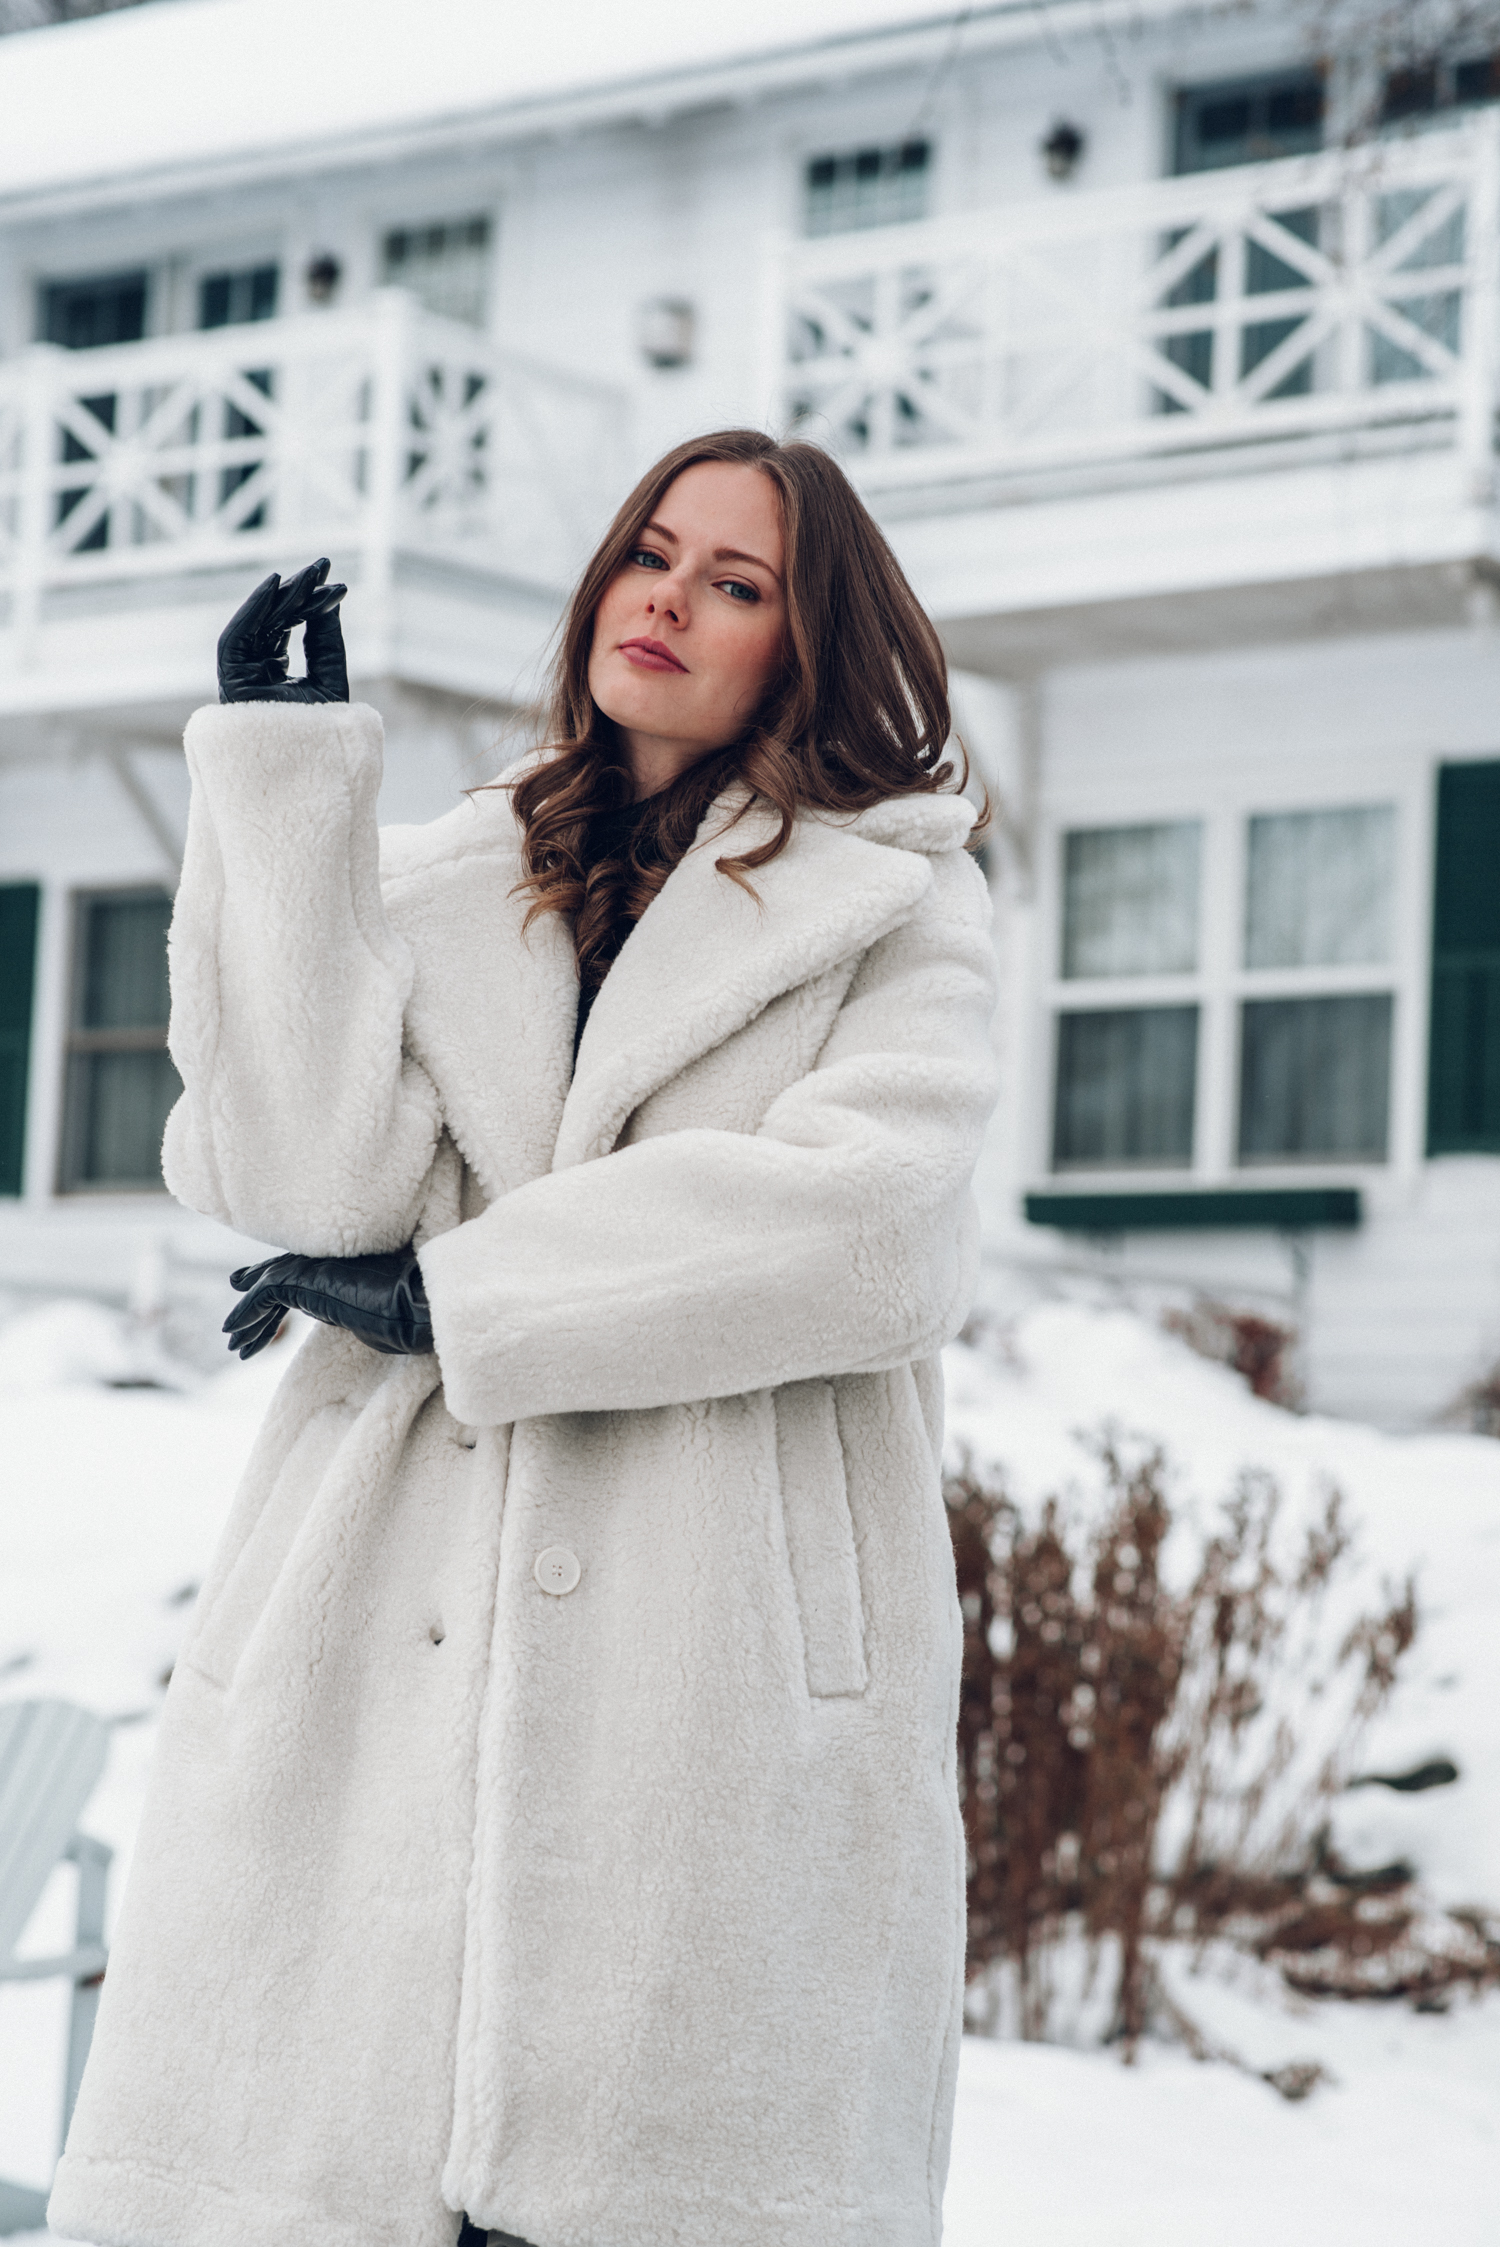 Alyssa Campanella of The A List blog visits Manoir Hovey in Québec wearing And Other Stories faux fur coat and Marc Fisher Izzie boots